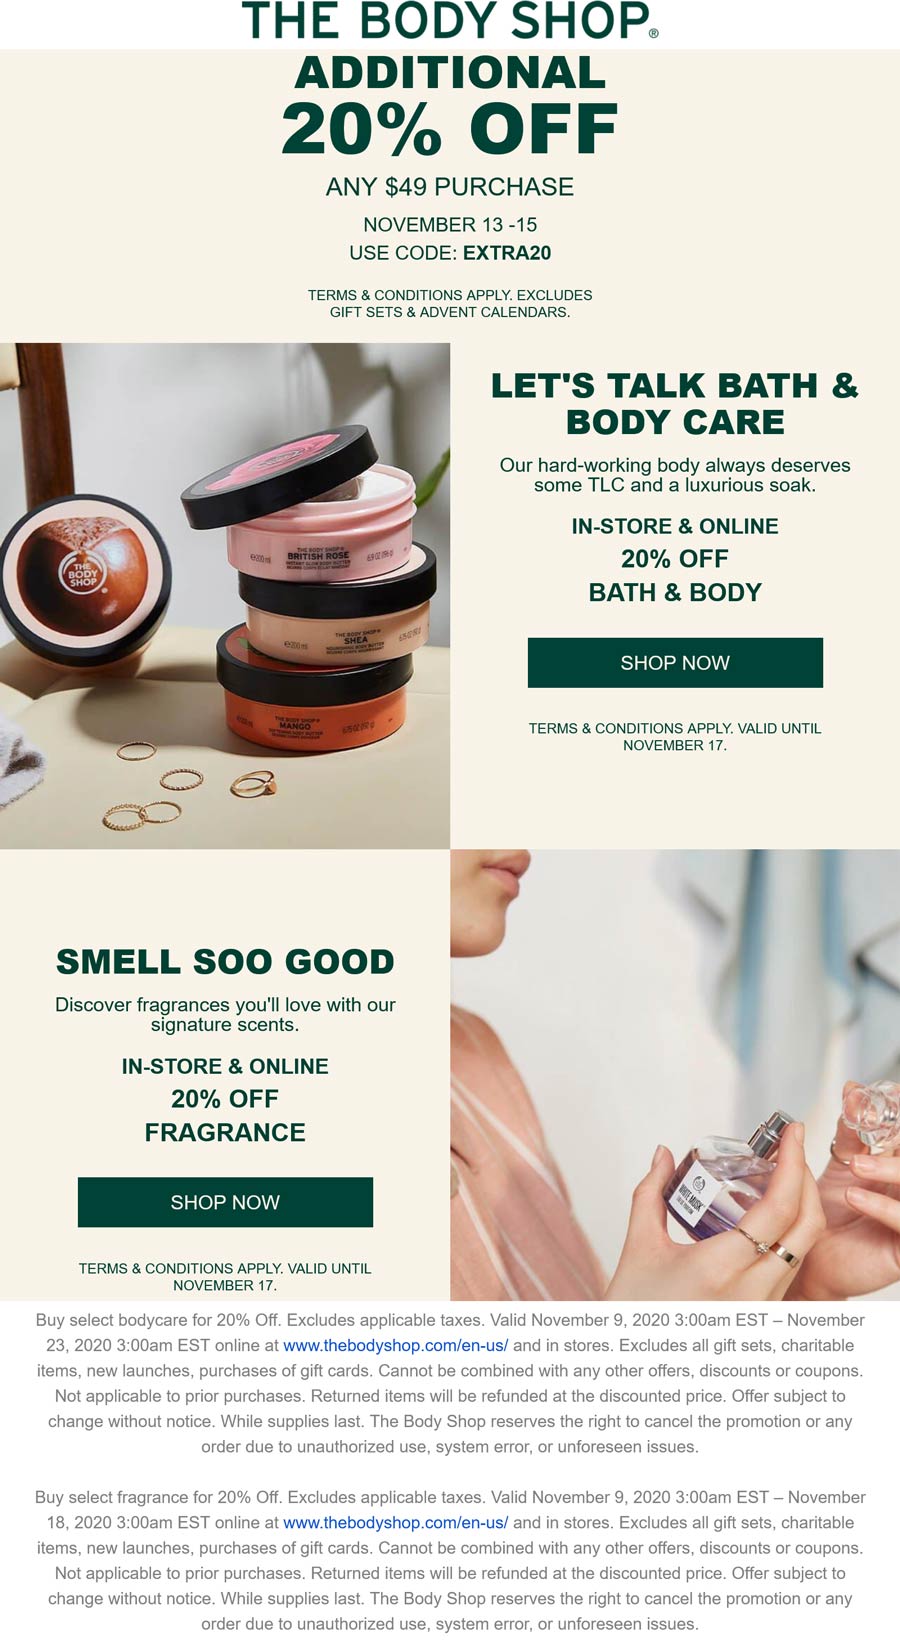 The Body Shop stores Coupon  20% off $49 online at The Body Shop via promo code EXTRA20 #thebodyshop 